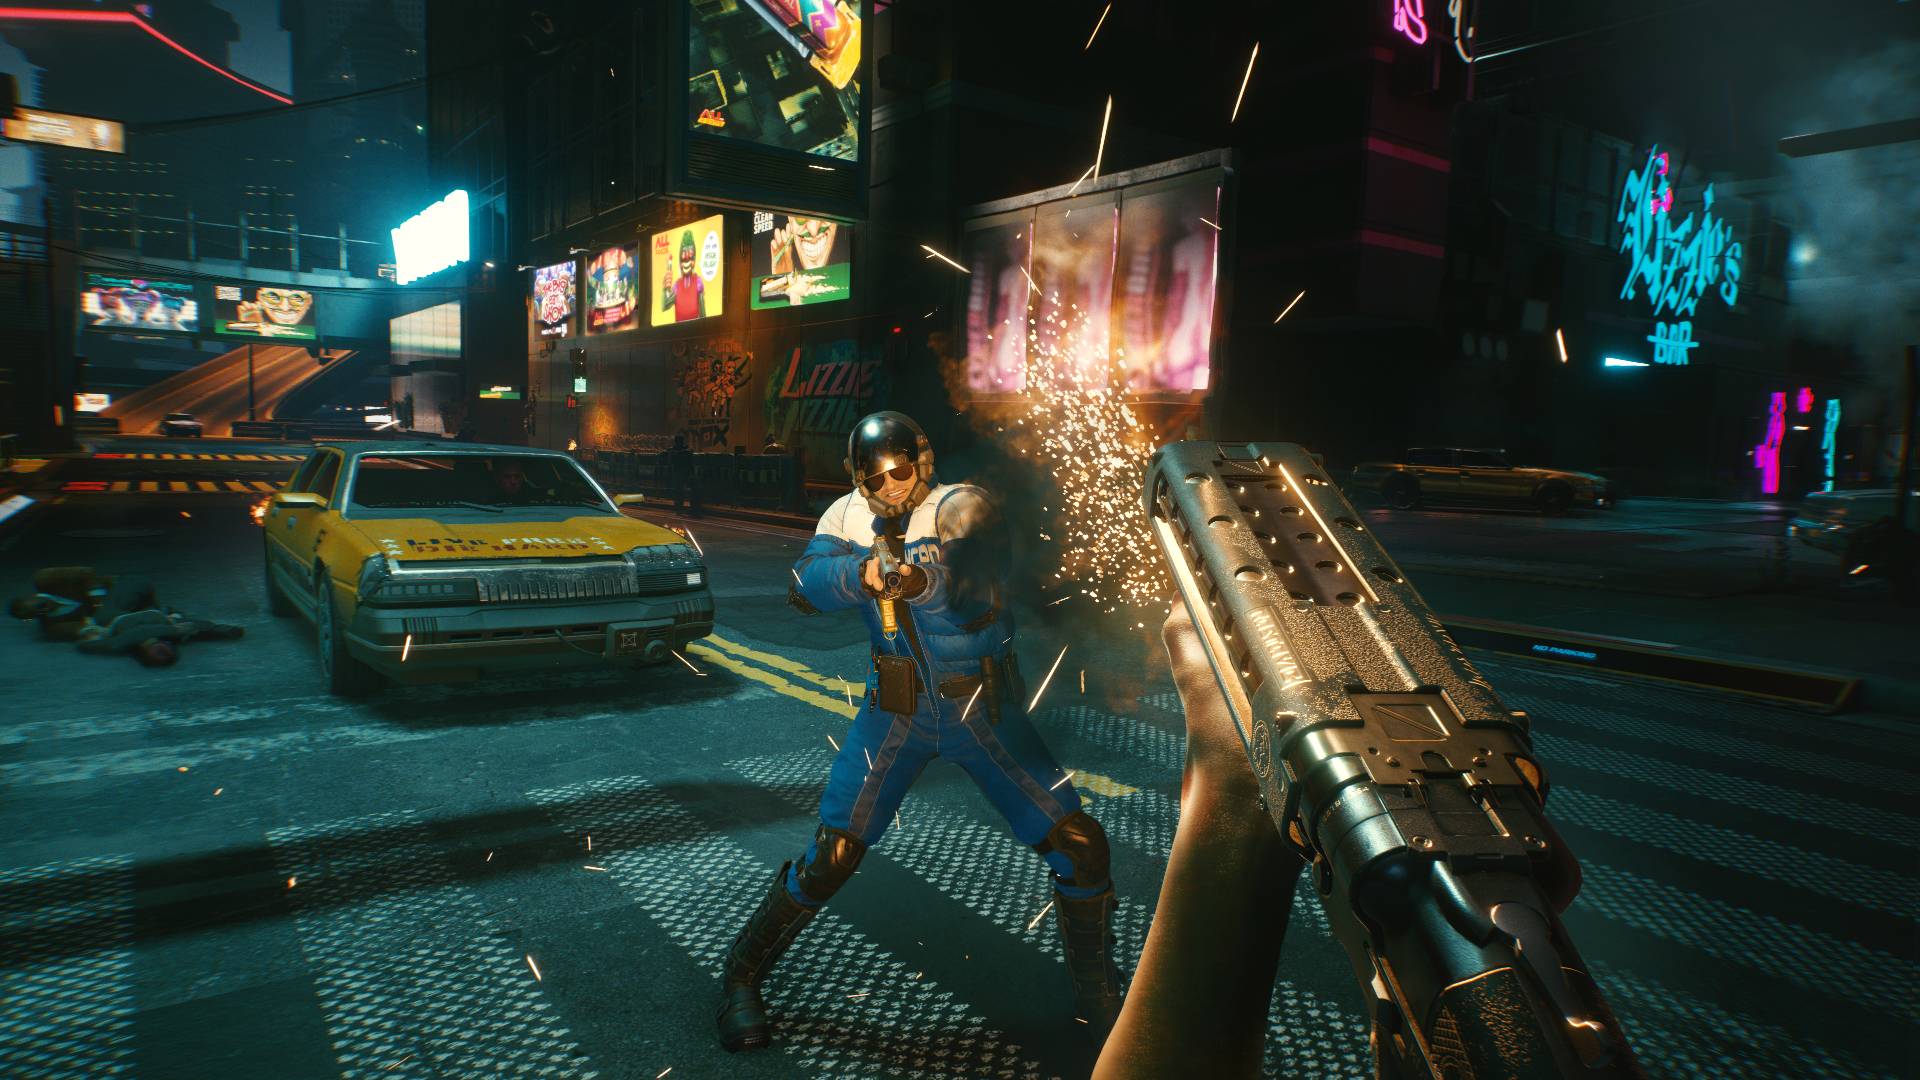 We Go Hands On With Cyberpunk 2077 The Hype Real?